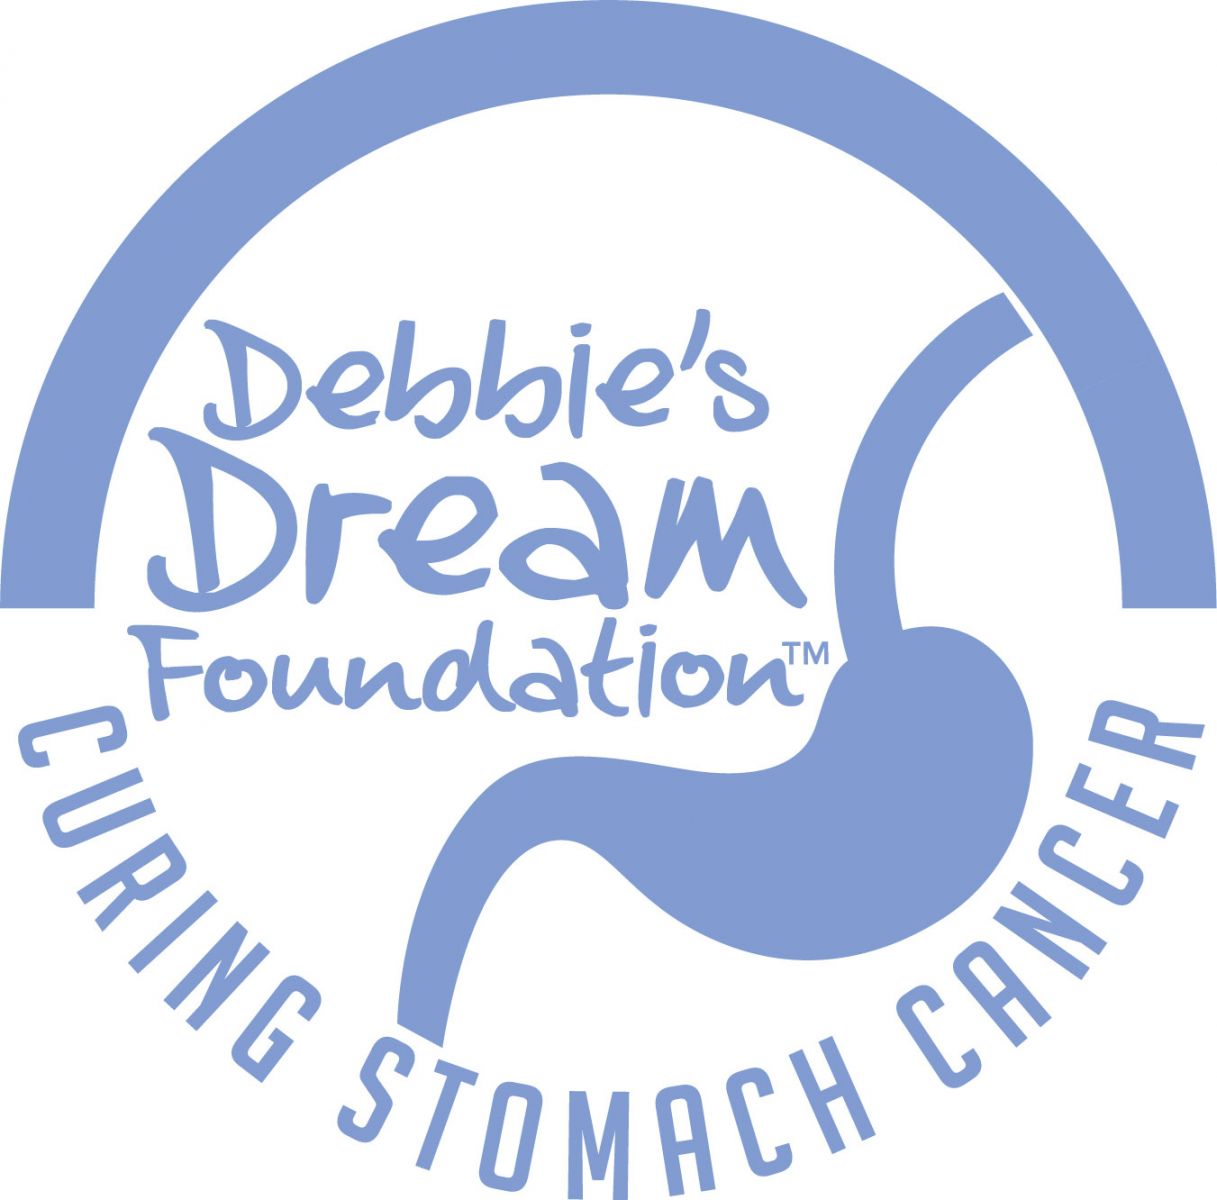 Debbie’s Dream Foundation: Curing Stomach Cancer